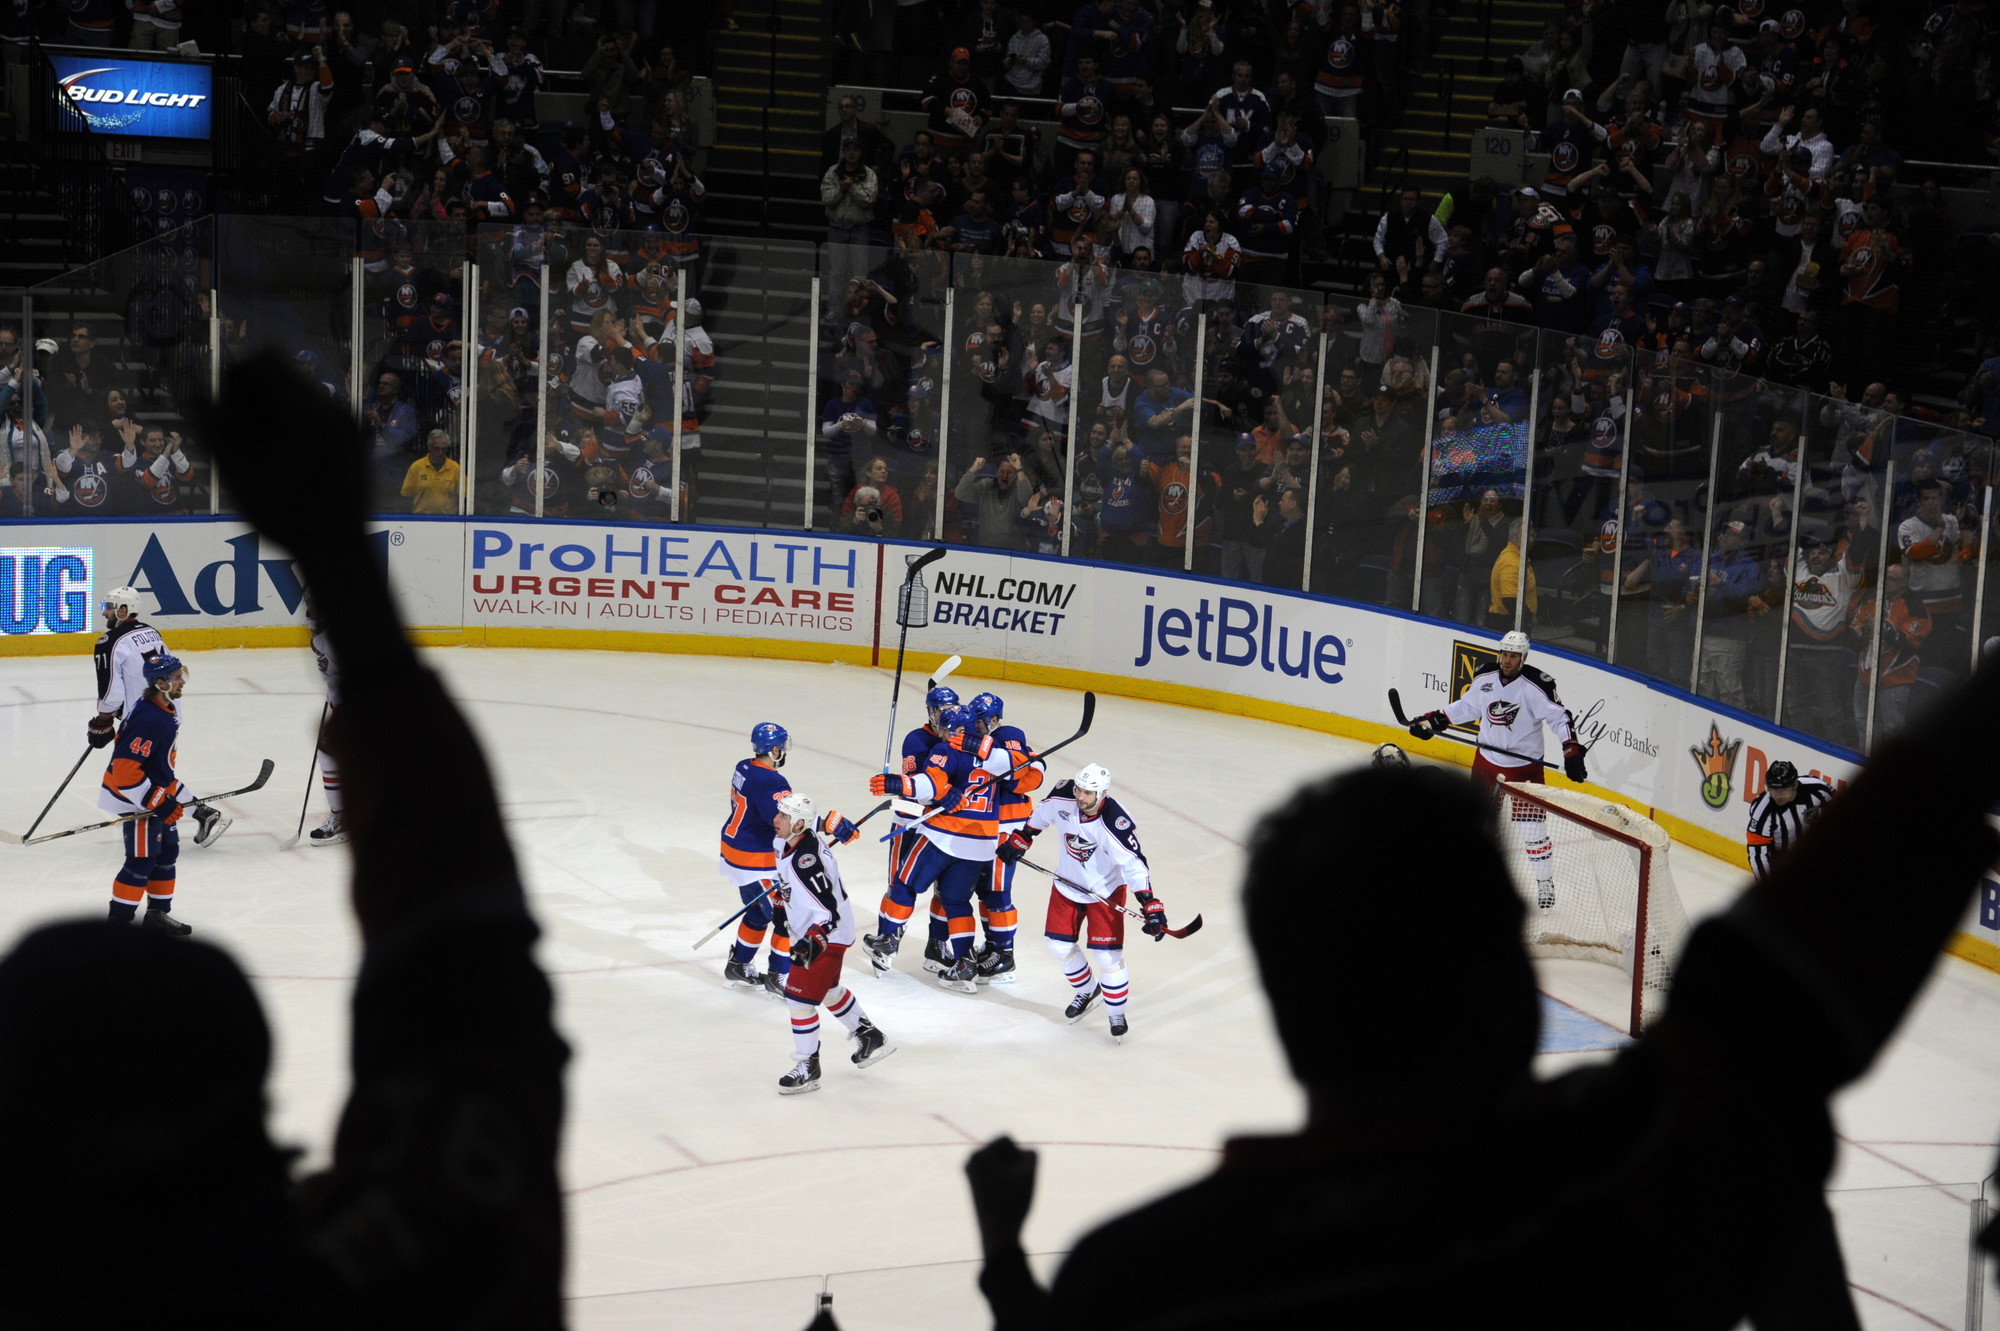 New York Islanders Will Benefit From Playing at Nassau Coliseum